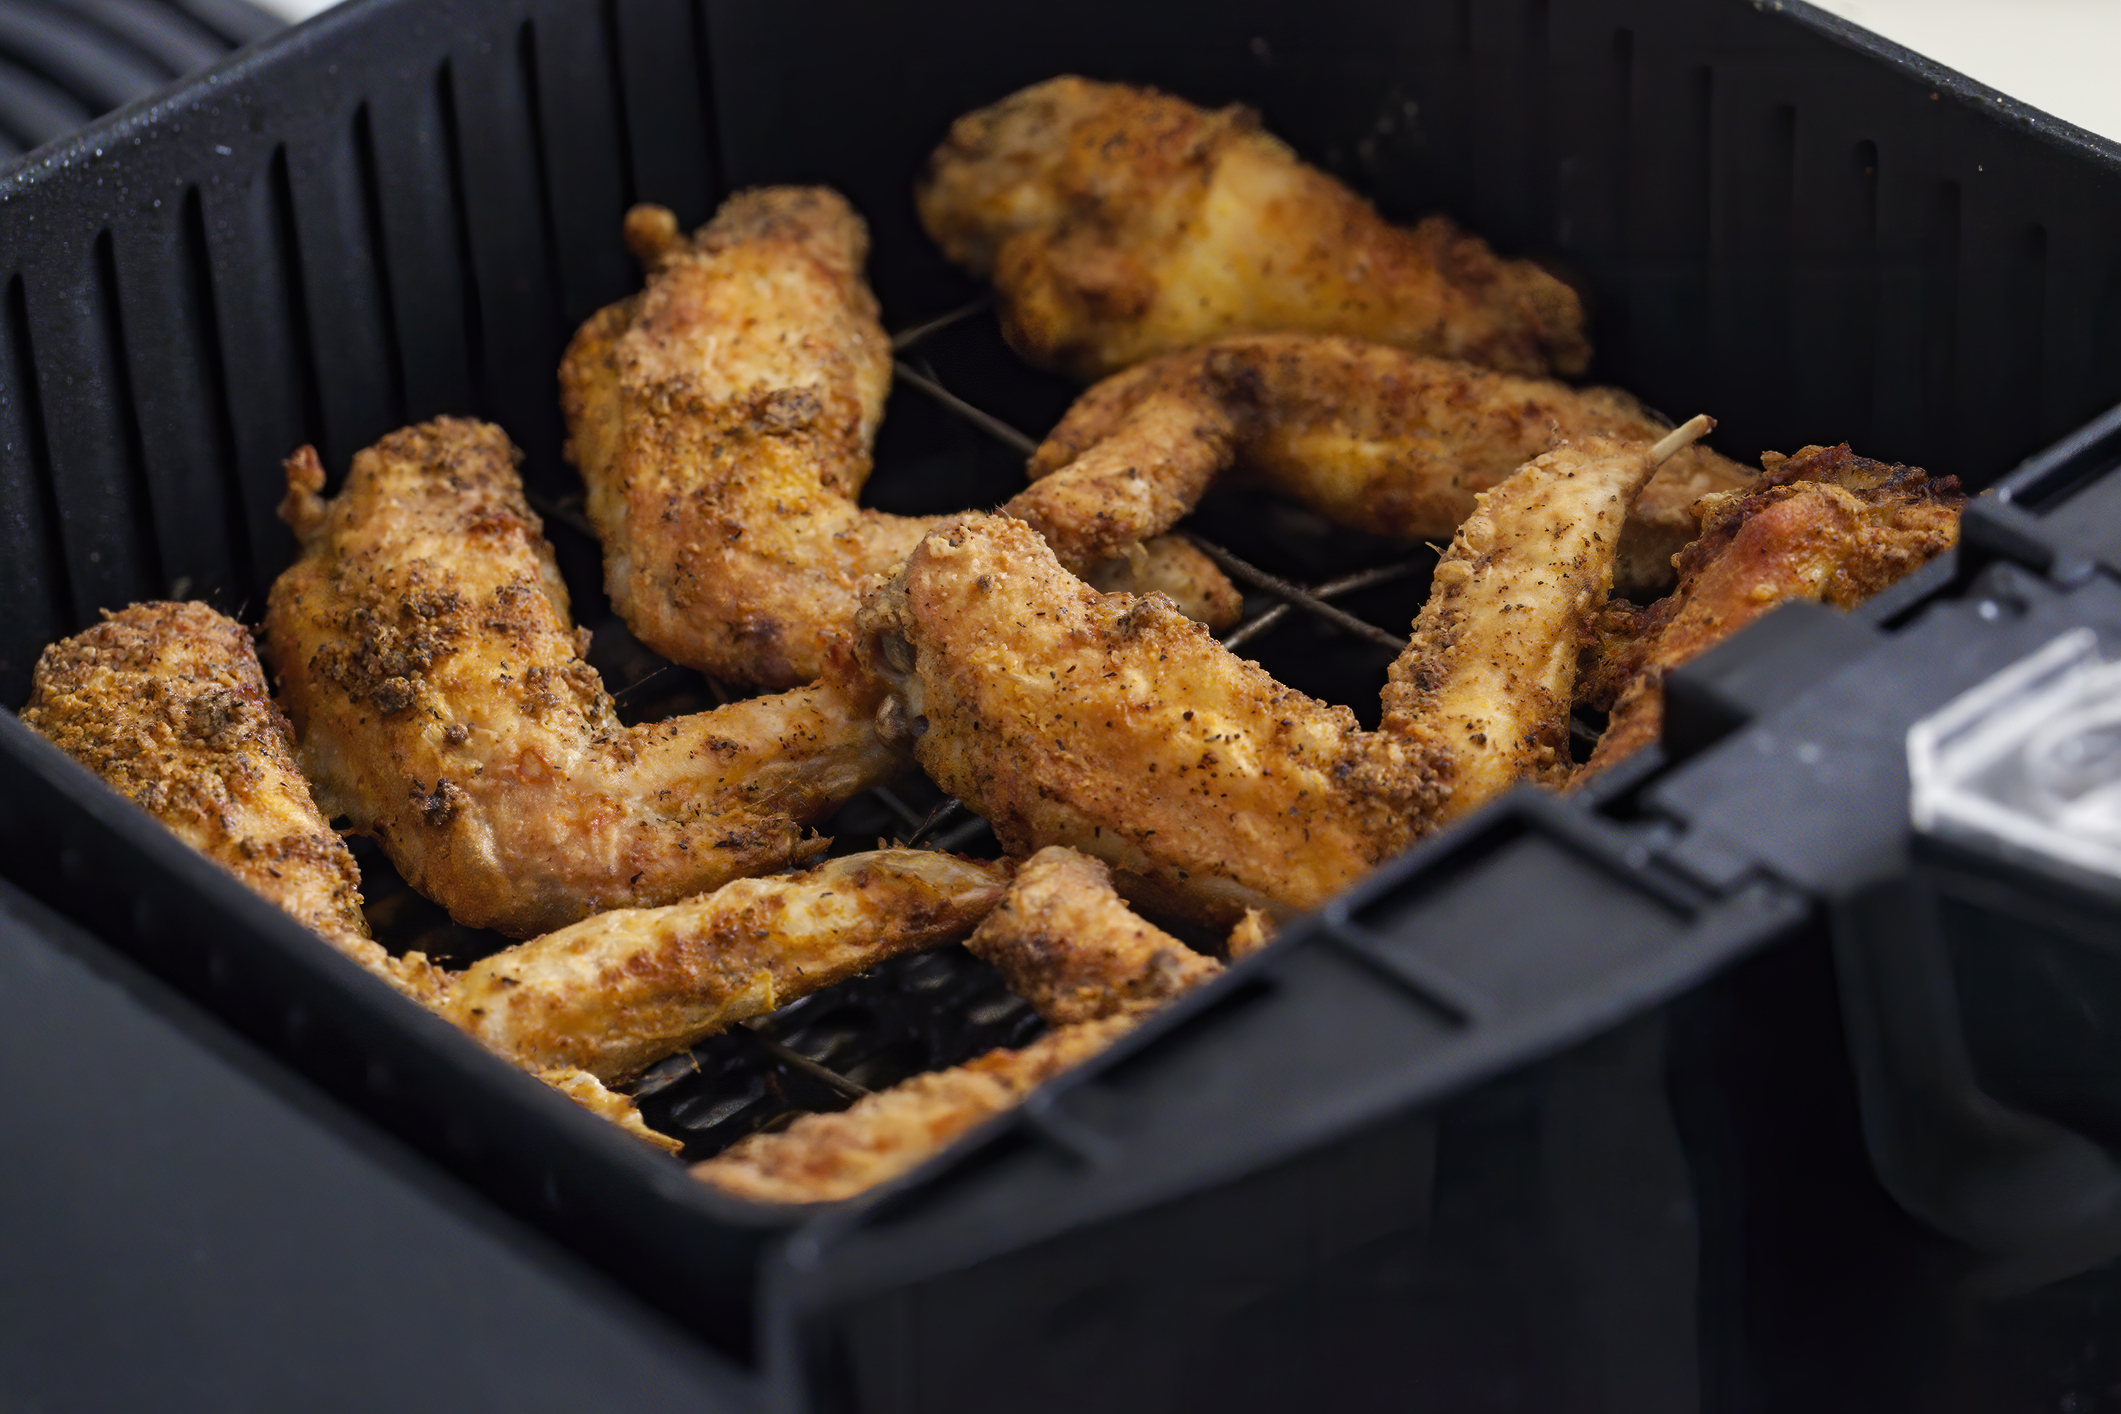 Here's how to clean grease and stuck on gunk in your air fryer. Pictured: An air fryer with fully cooked chicken in the basket